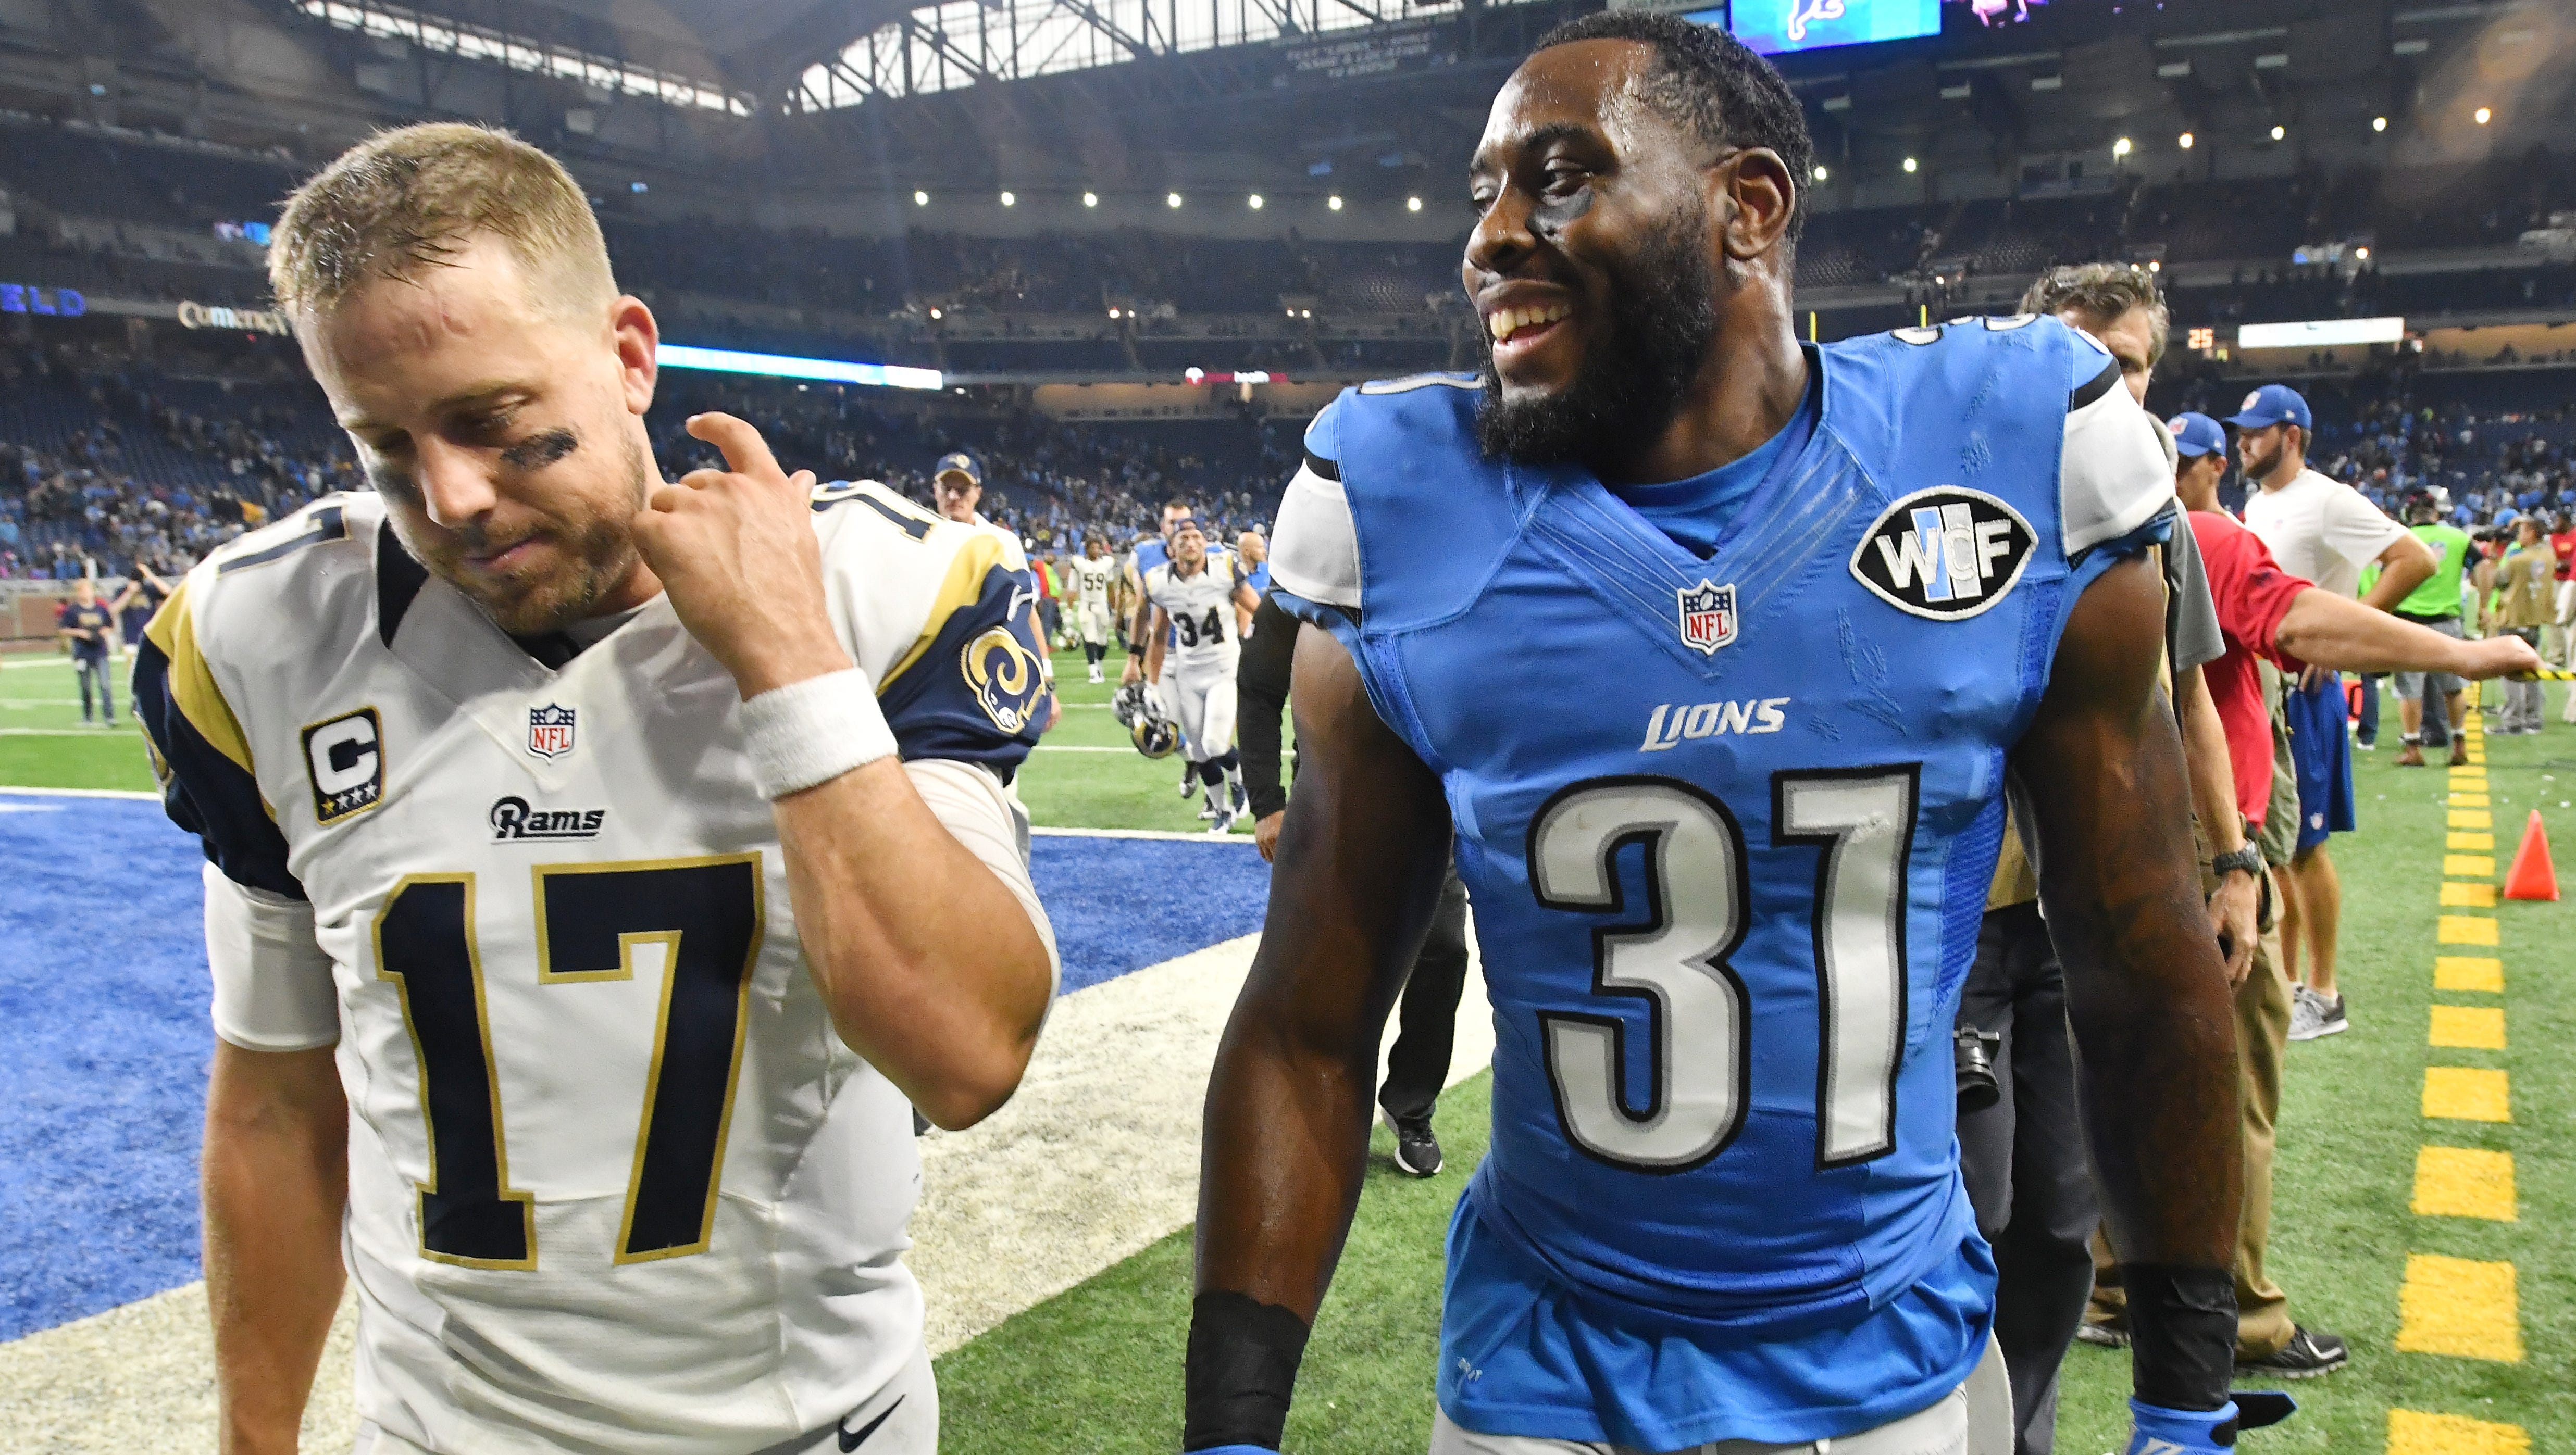 Rams quarterback Case Keenum and Lions safety Rafael Bush, who intercepted Keenum and allowed Detroit to run out the clock and win the game 31-28, walk off the field together.